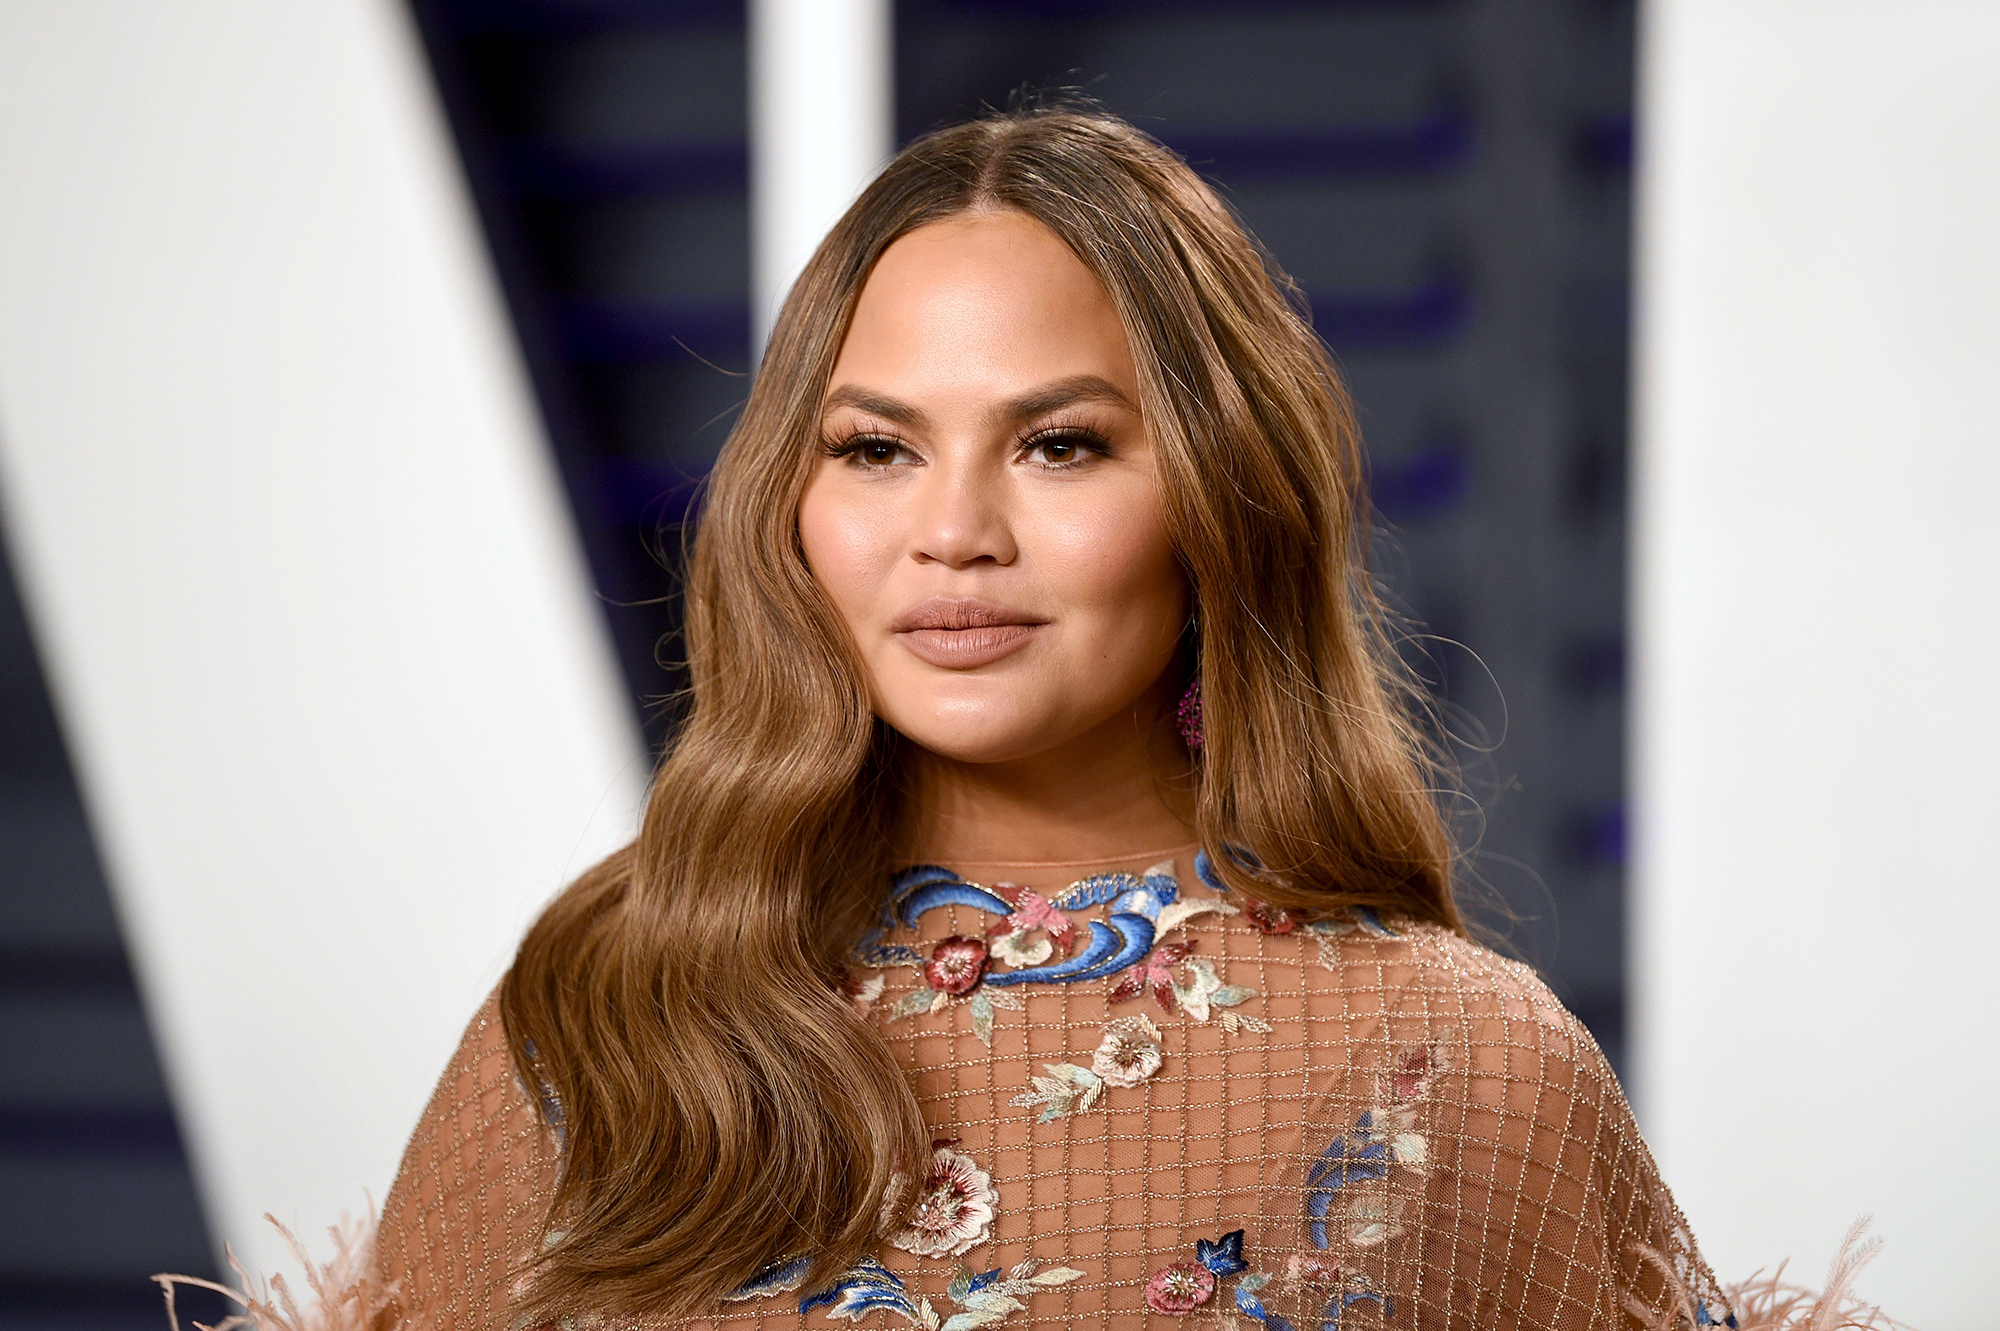 Chrissy Teigen Exits Twitter After 10 Years, Deactivates Account